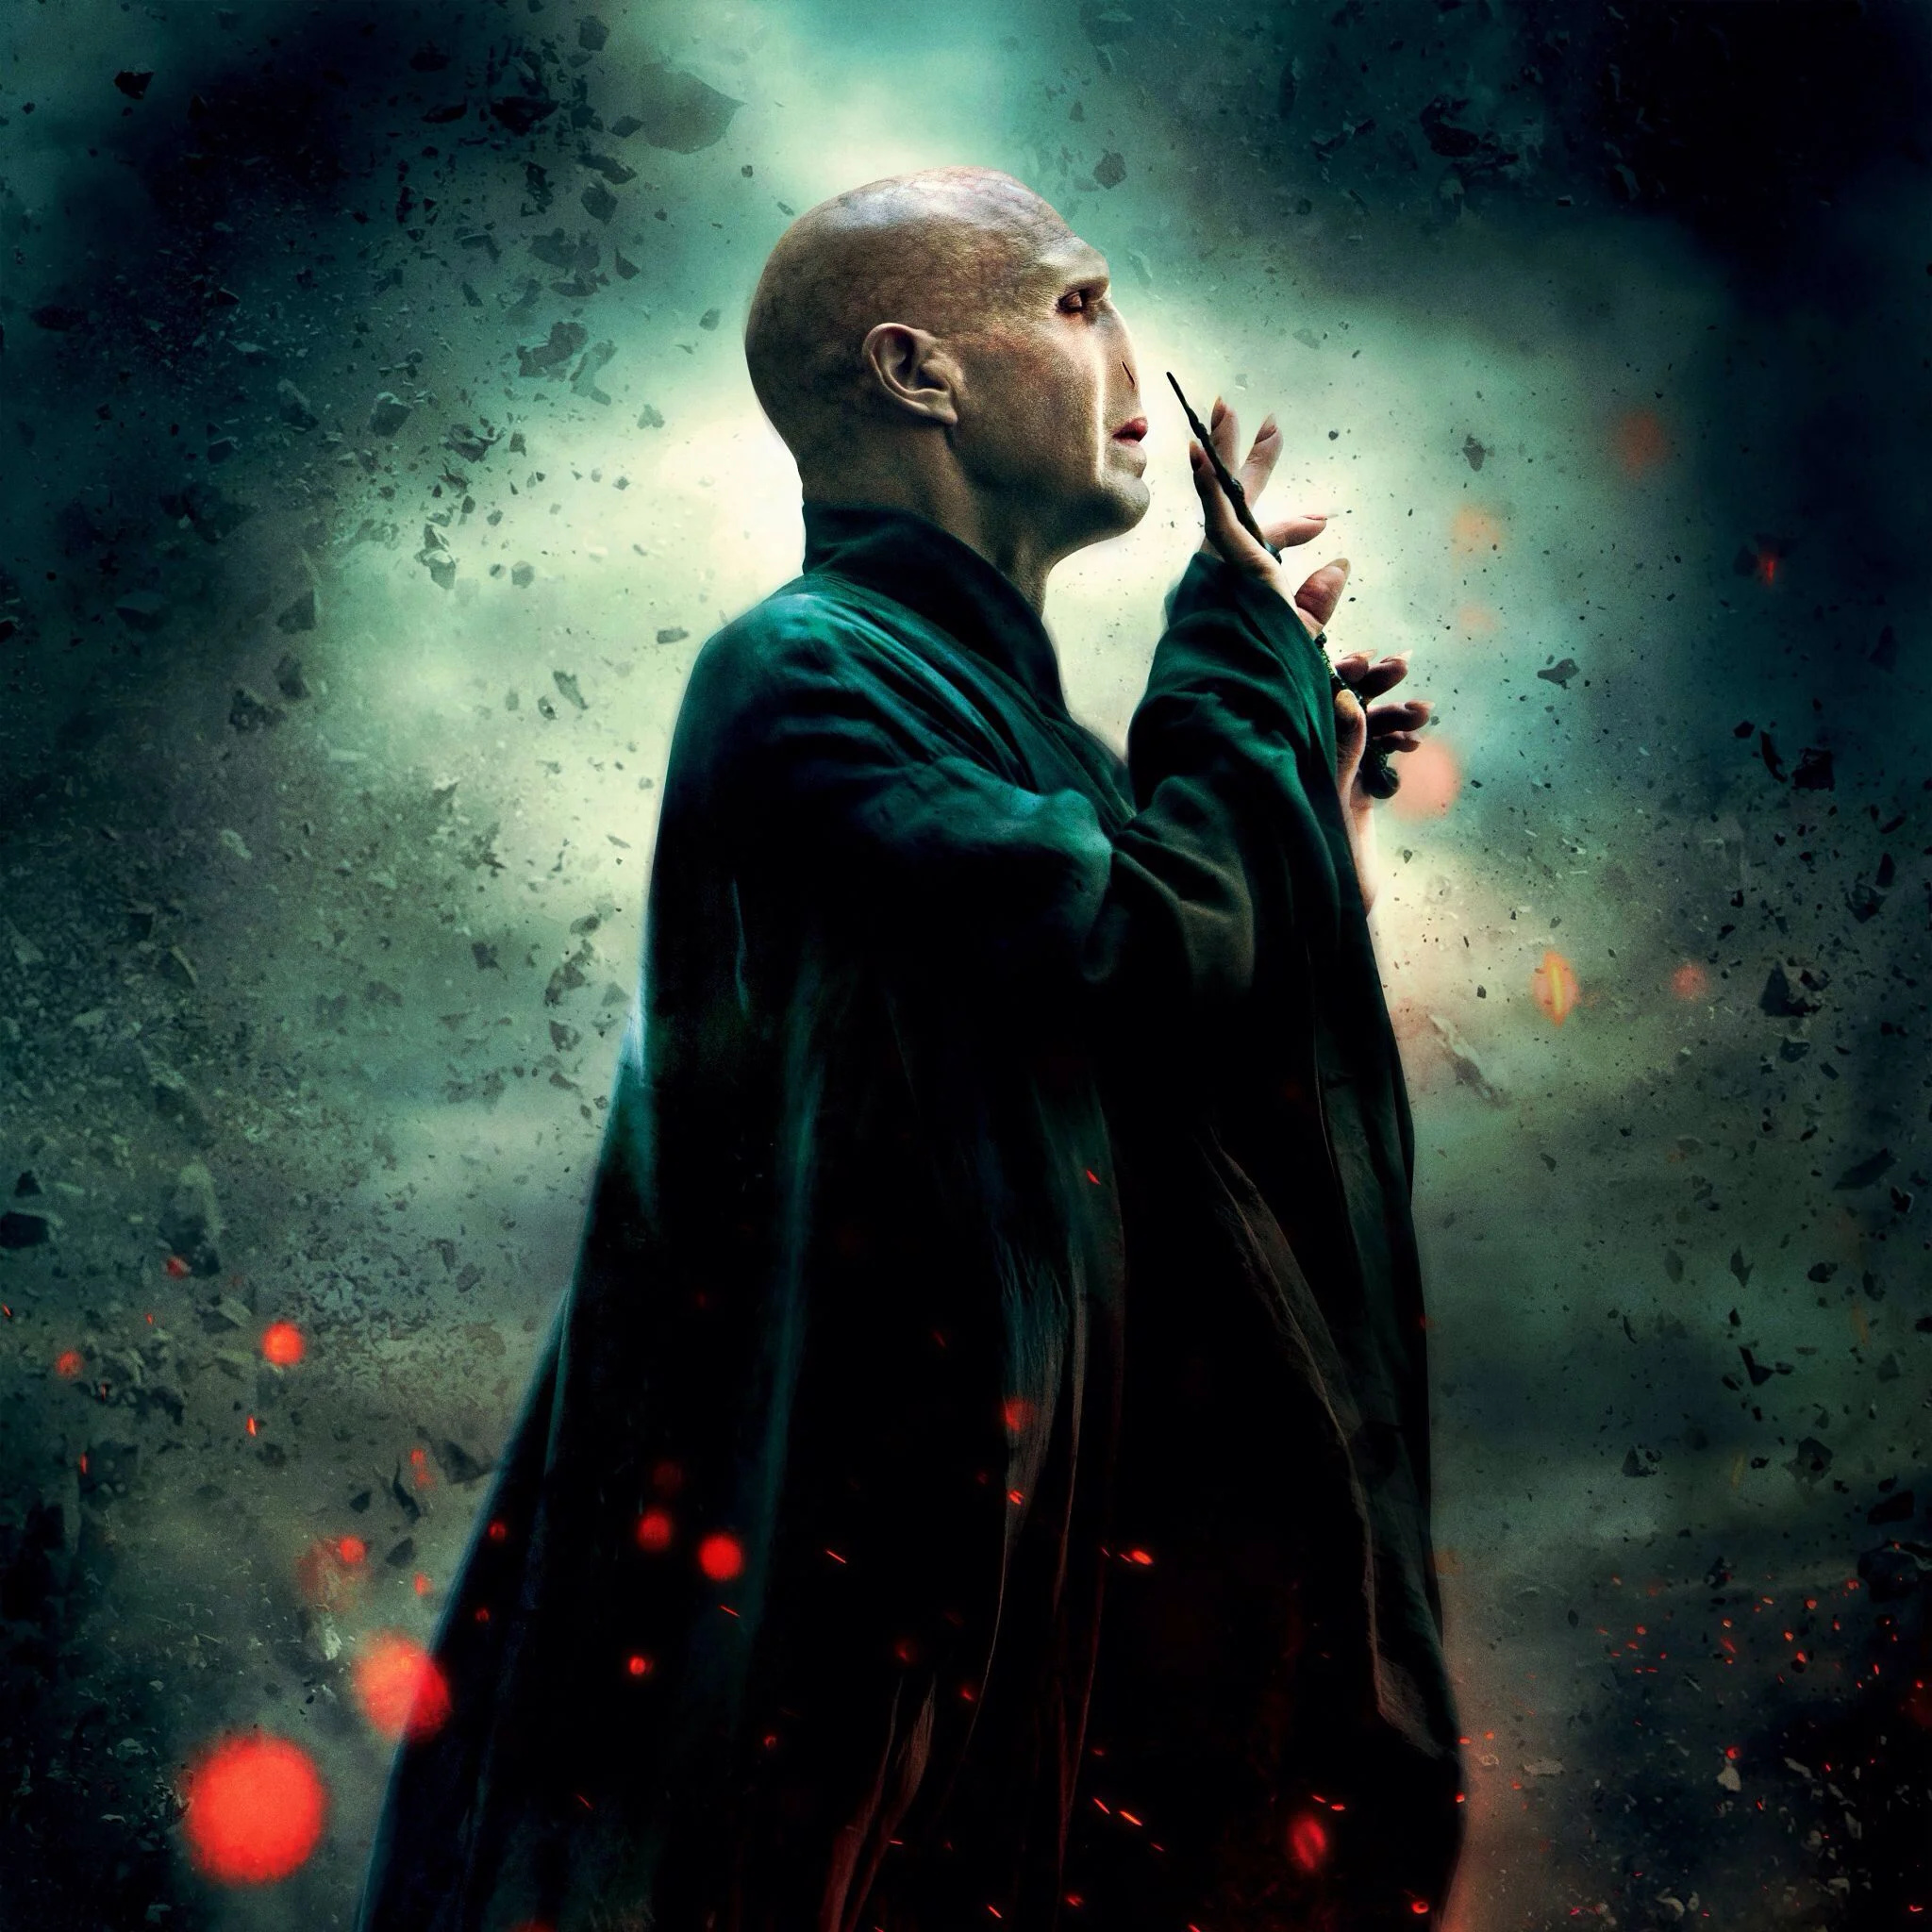 HD wallpaper, Movie Character, 2050X2050 Hd Phone, Harry Potter, Iphone Hd Lord Voldemort Wallpaper Image, Lord Voldemort, Voldemort Wallpaper